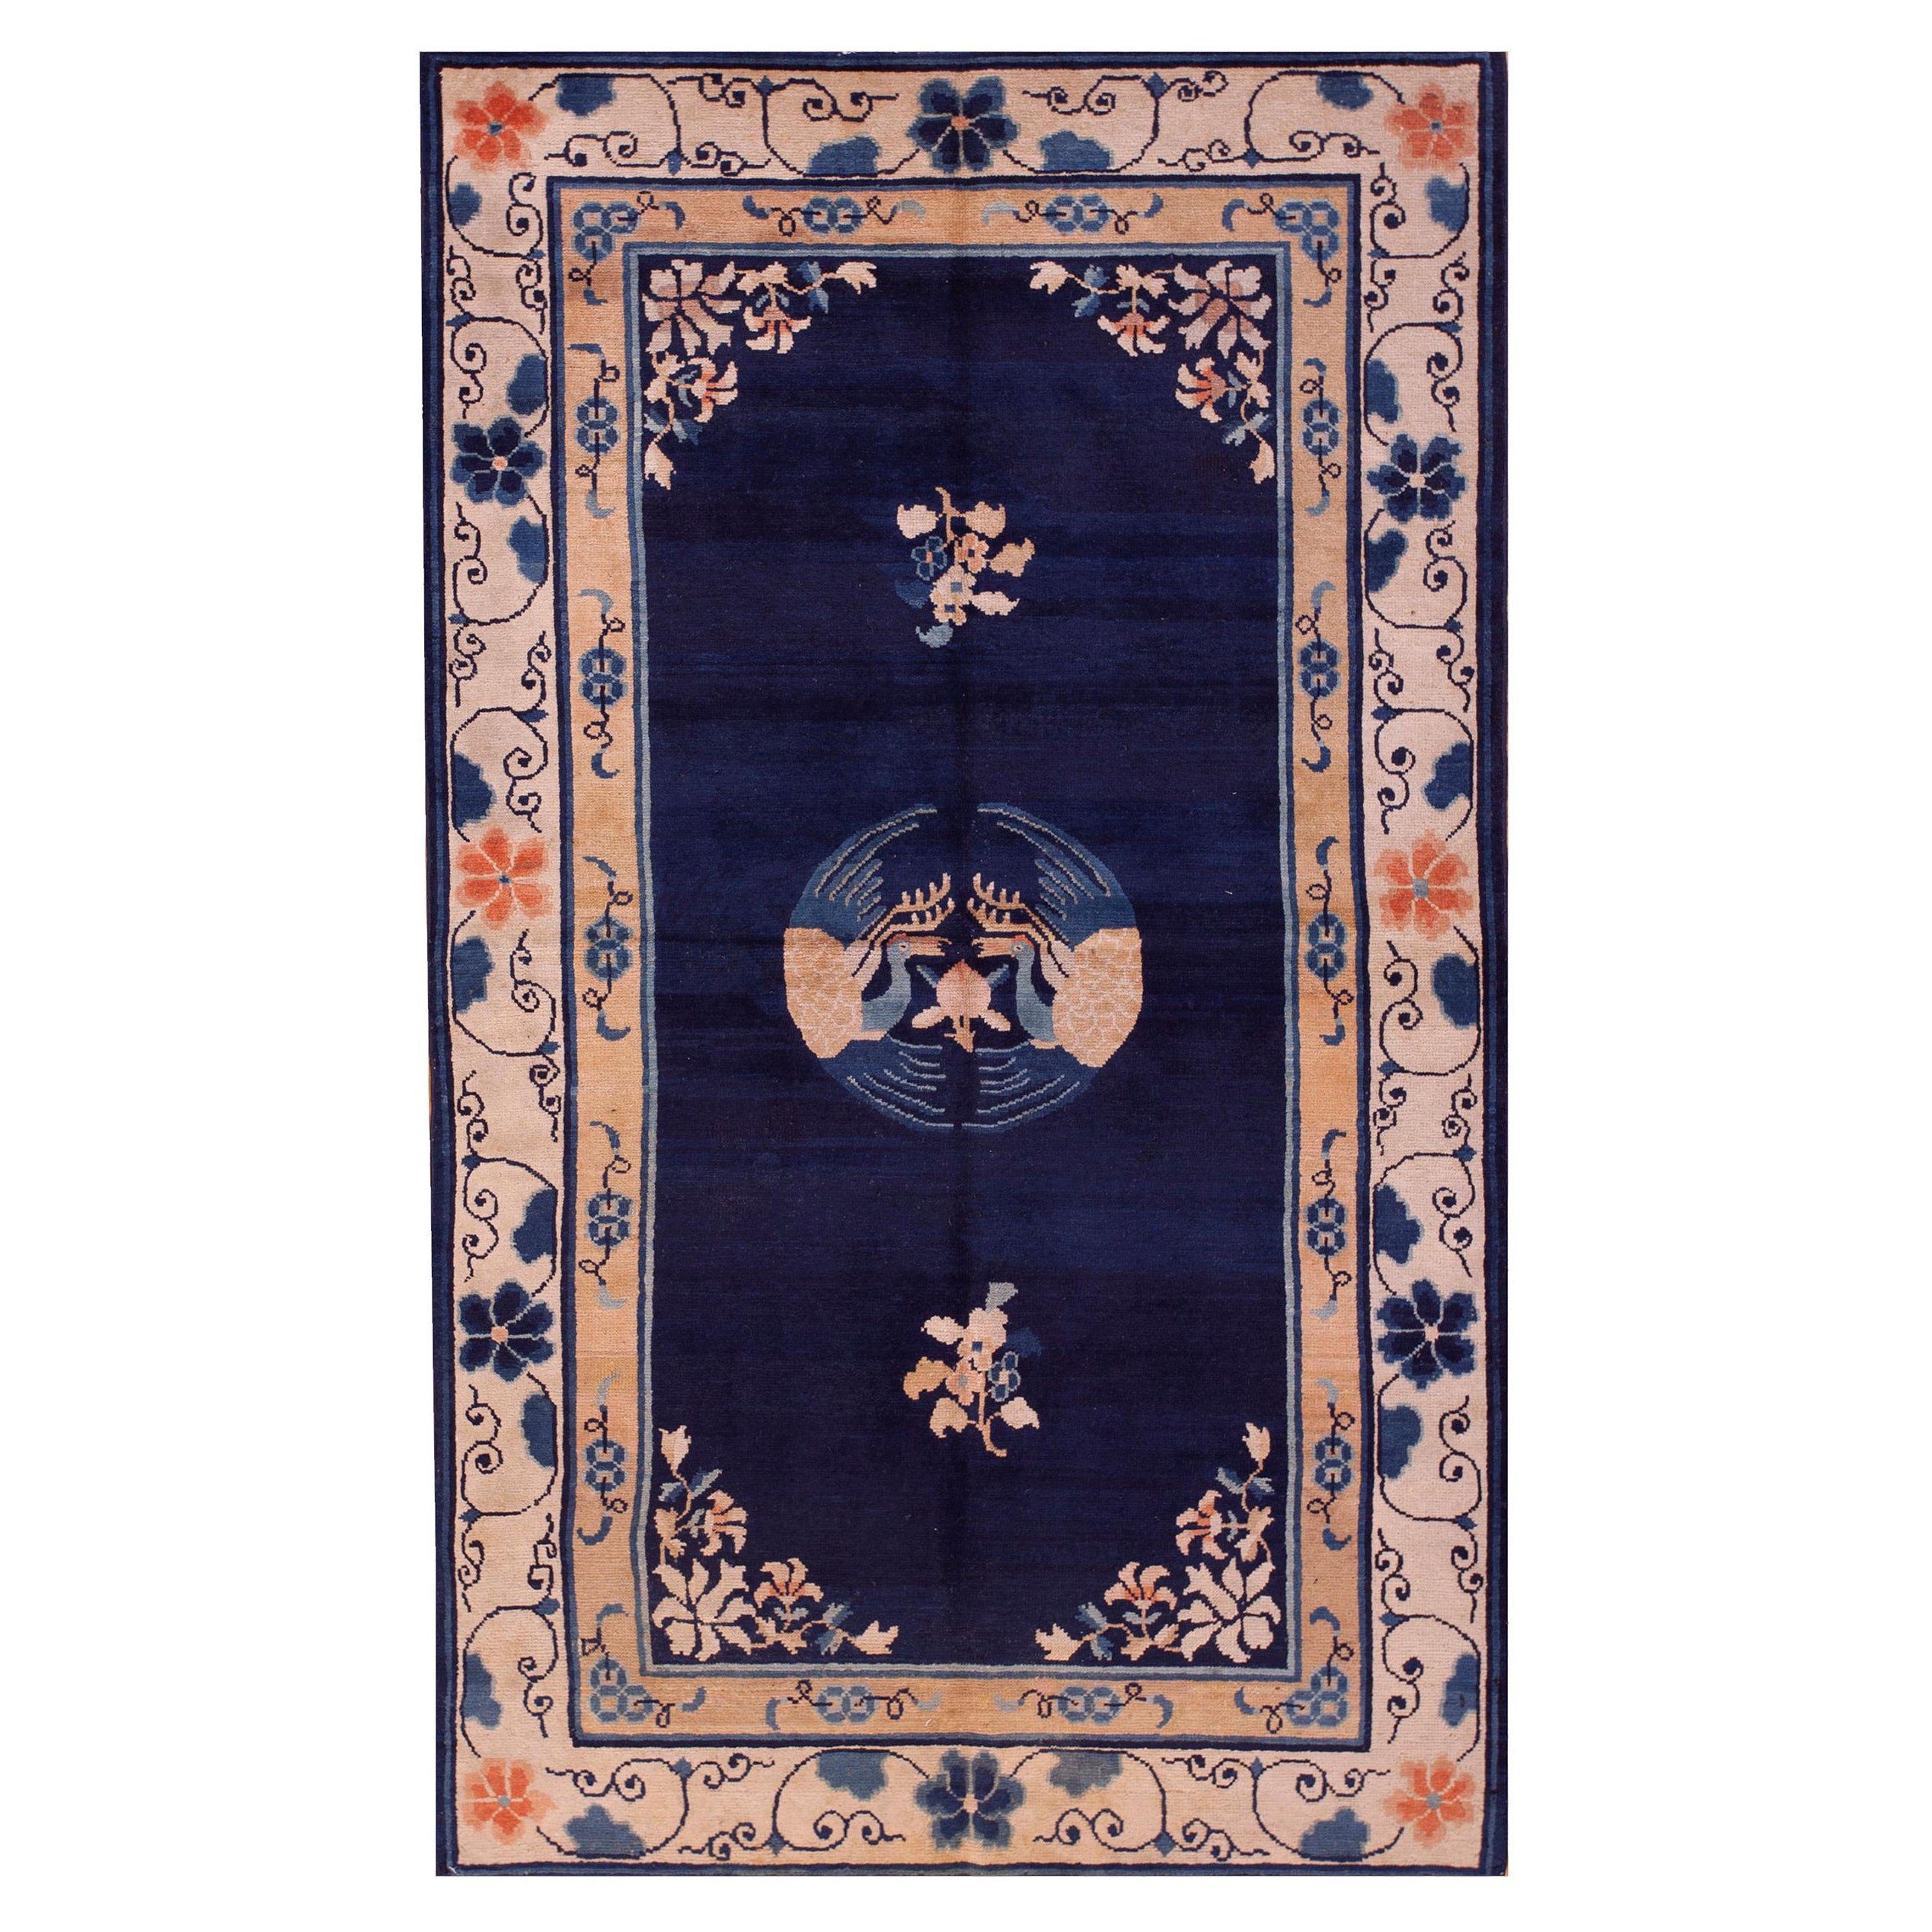 1920s Chinese Peking Carpet with Cranes 6' 8" x 4' 0"  For Sale